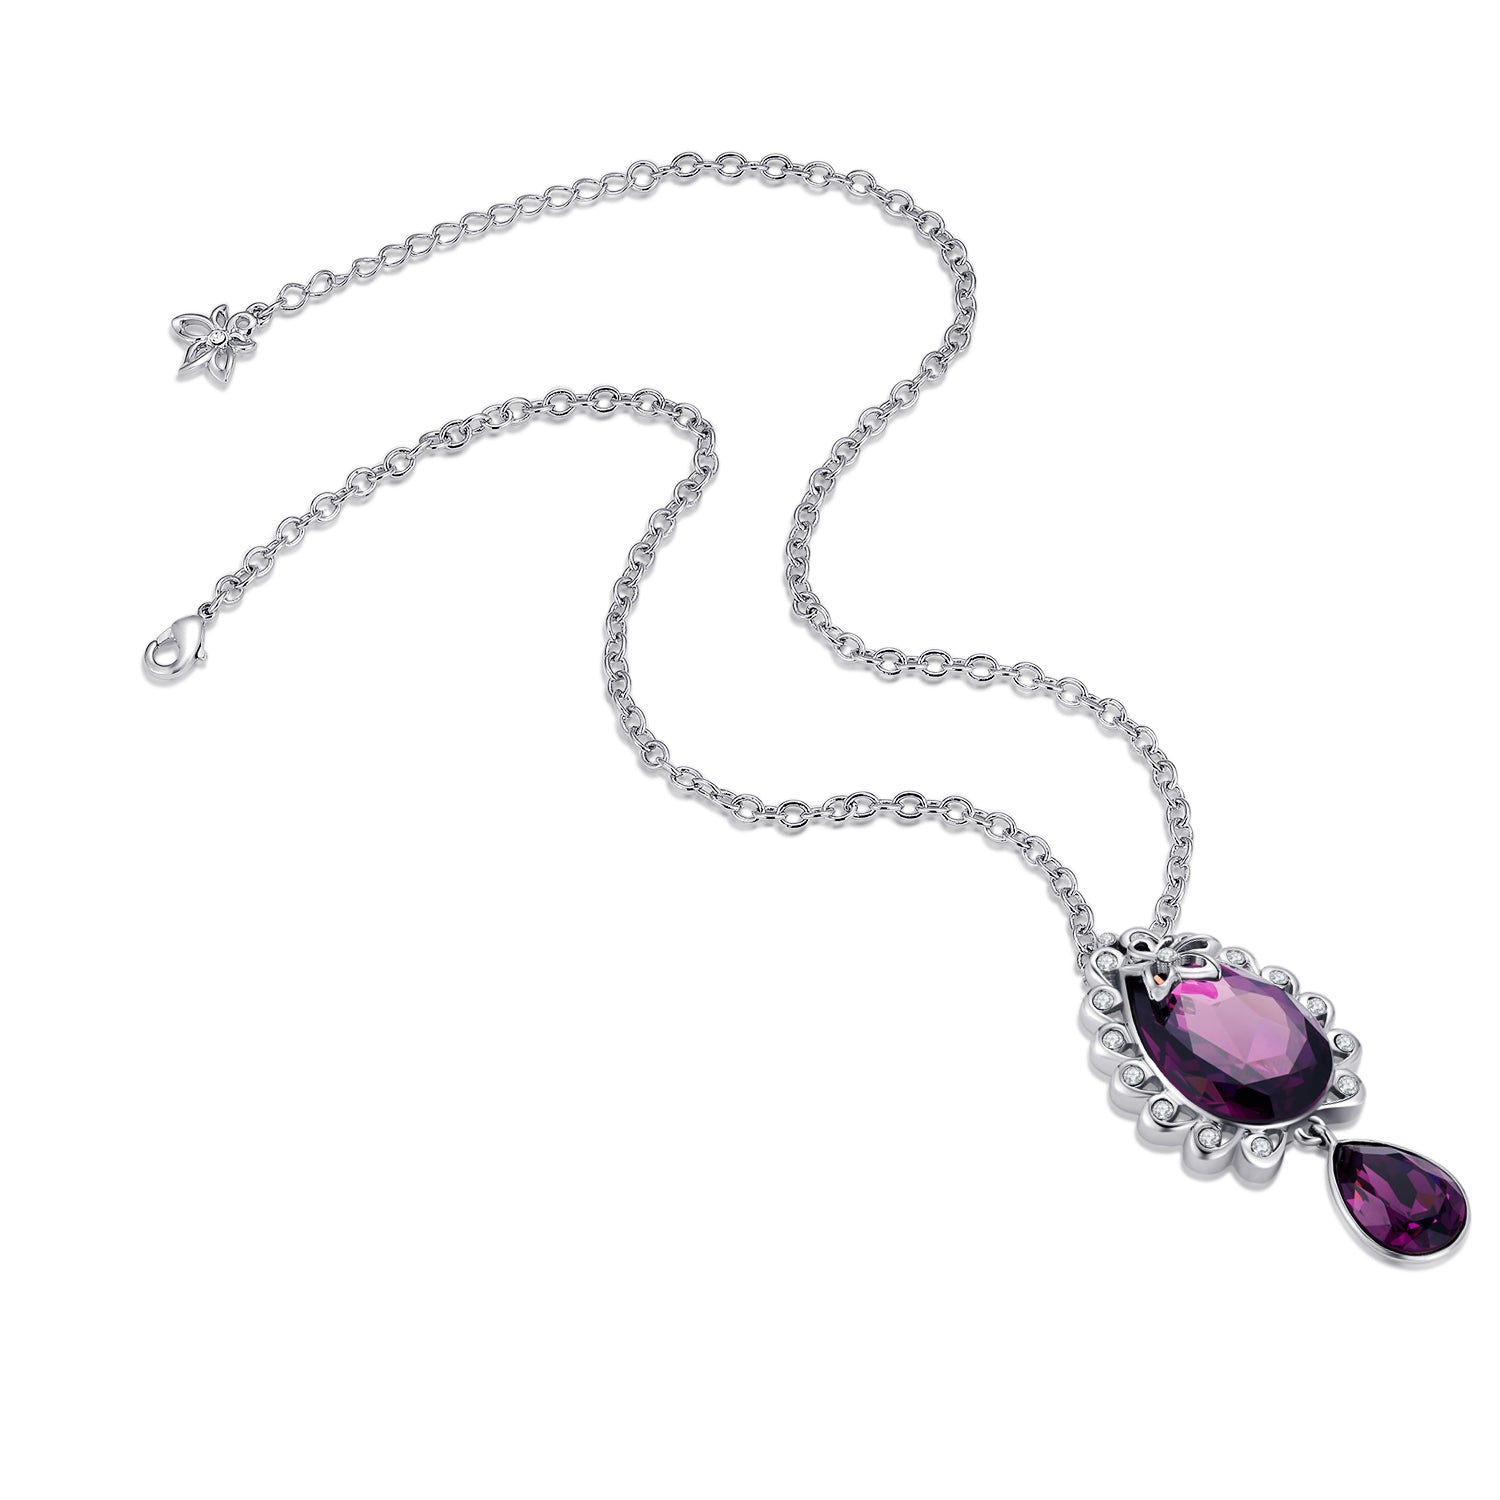 VICACCI Hollowed-out flower necklace, Embellished with crystals from Swarovski